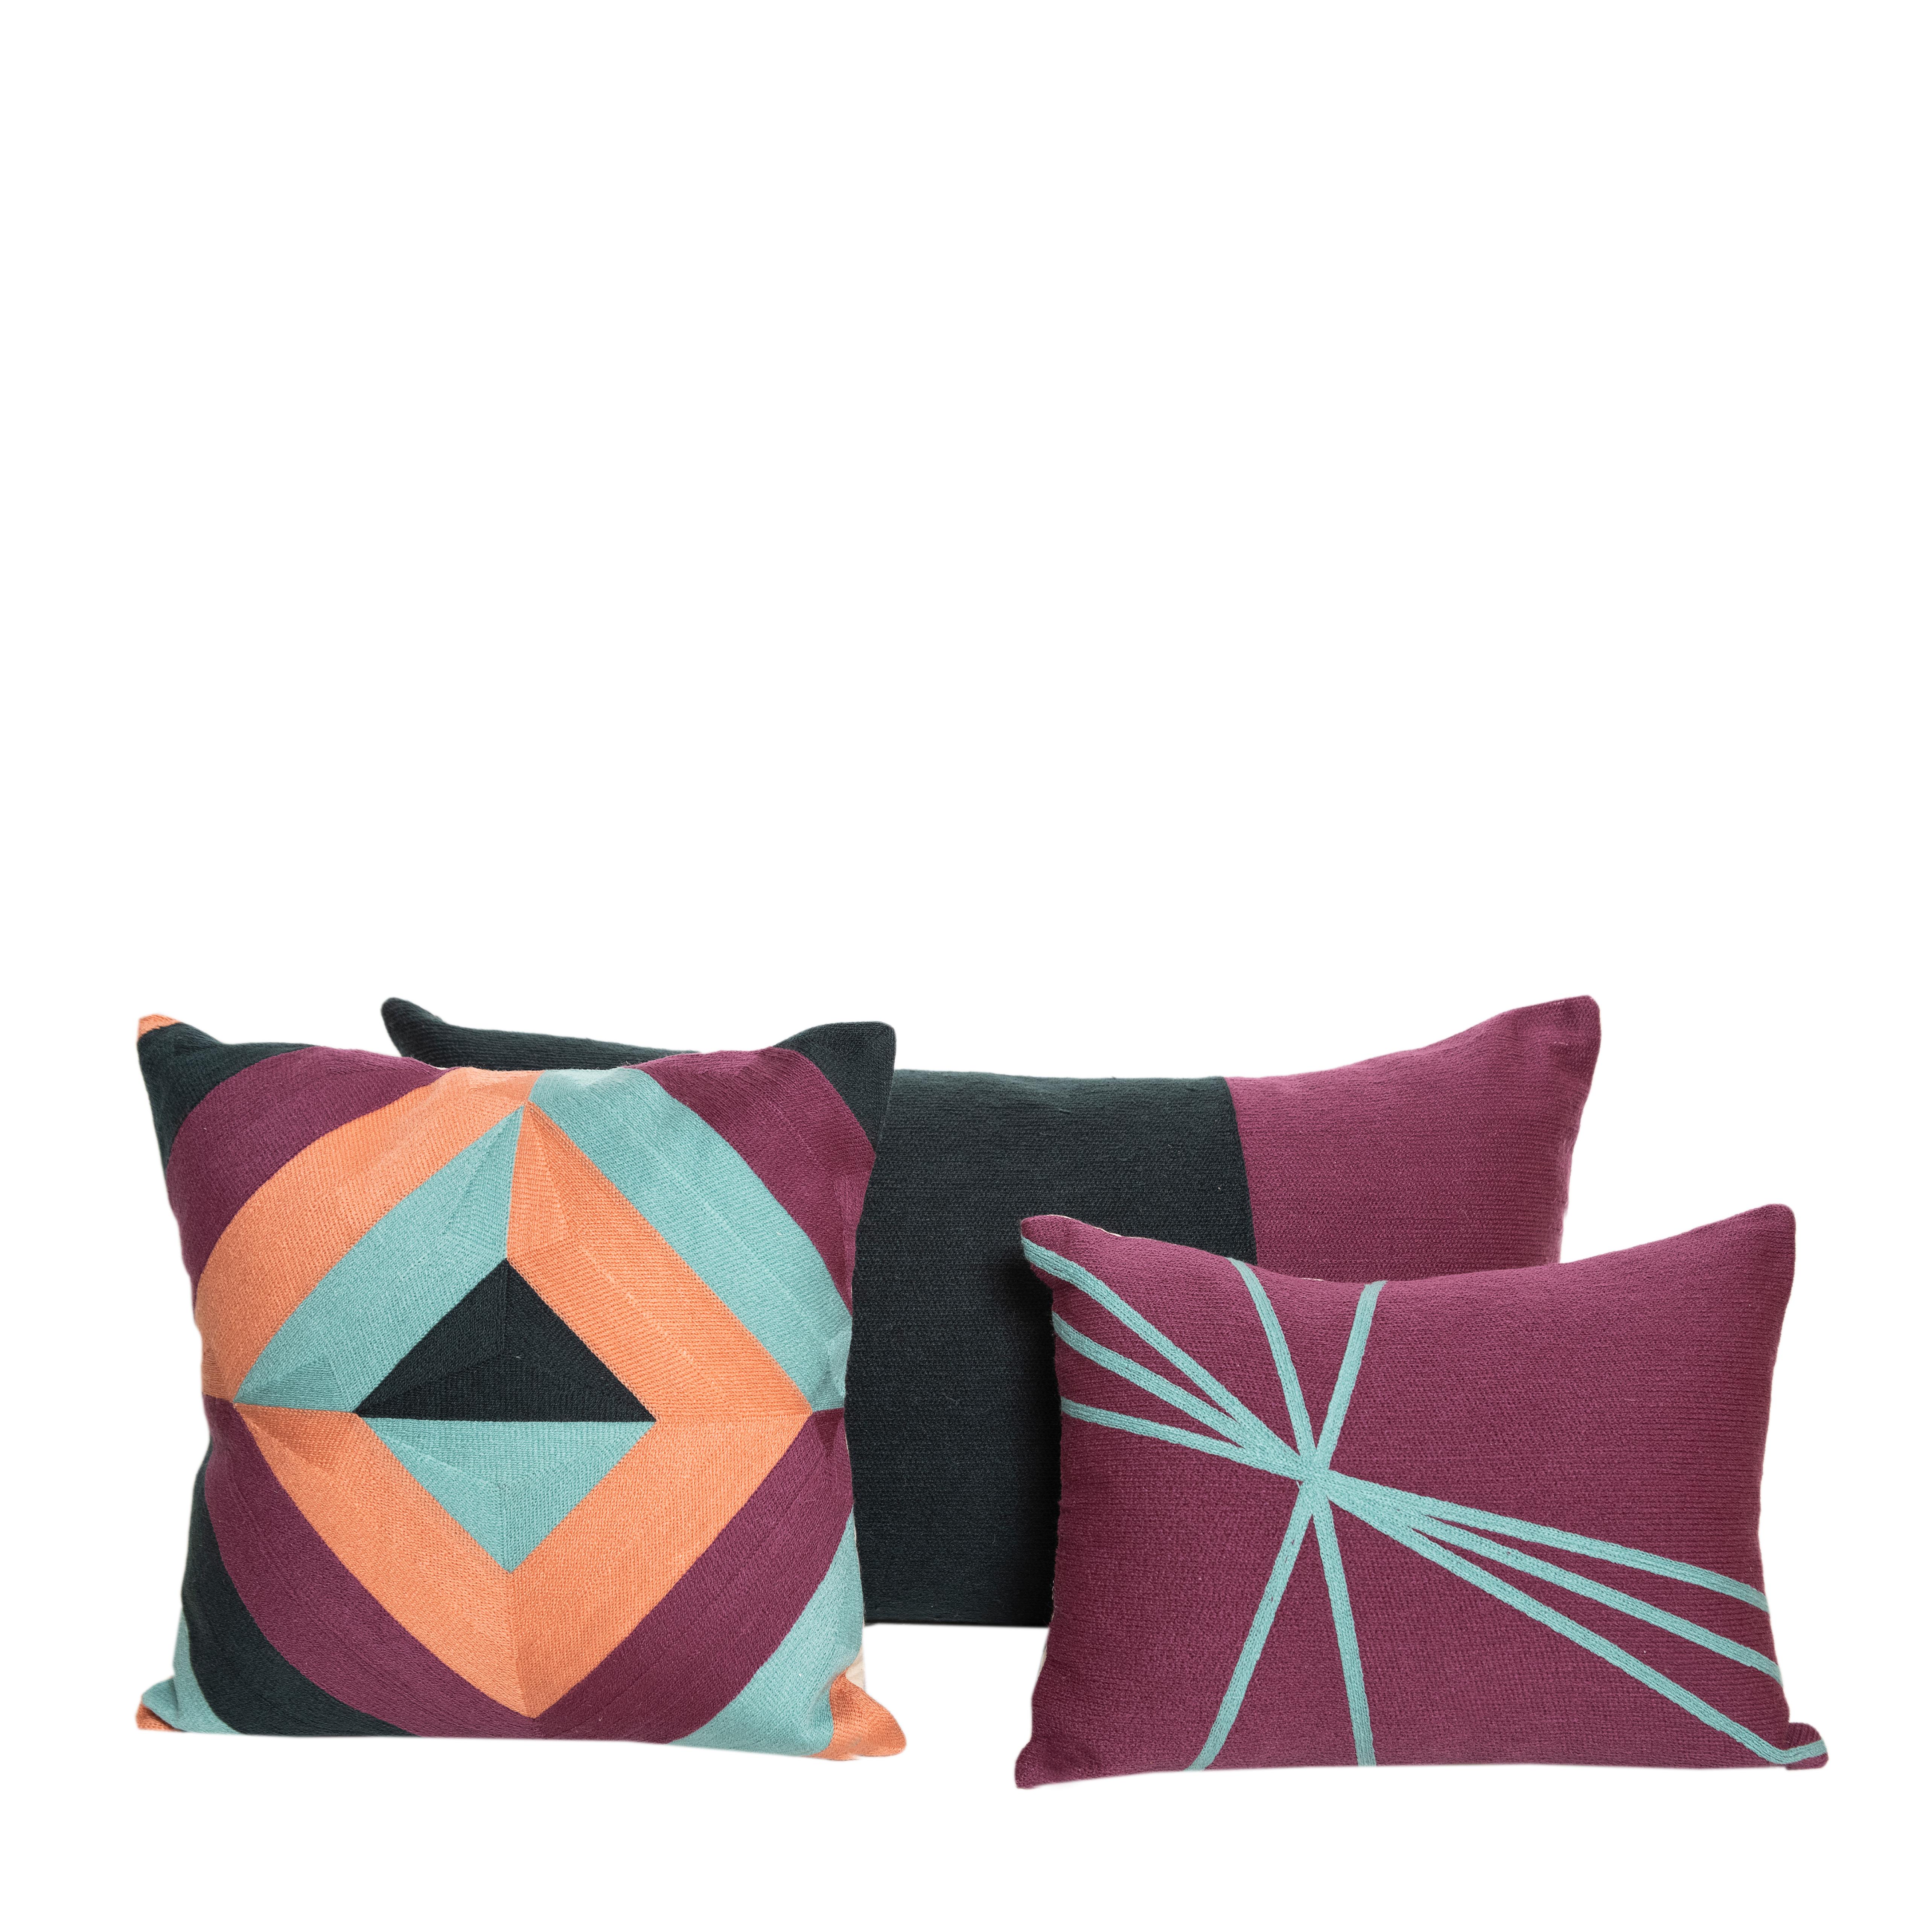 Modern Embroidery Pillow Cushion Cotton Geometric Purple Salmon Turquoise In New Condition For Sale In Madrid, ES